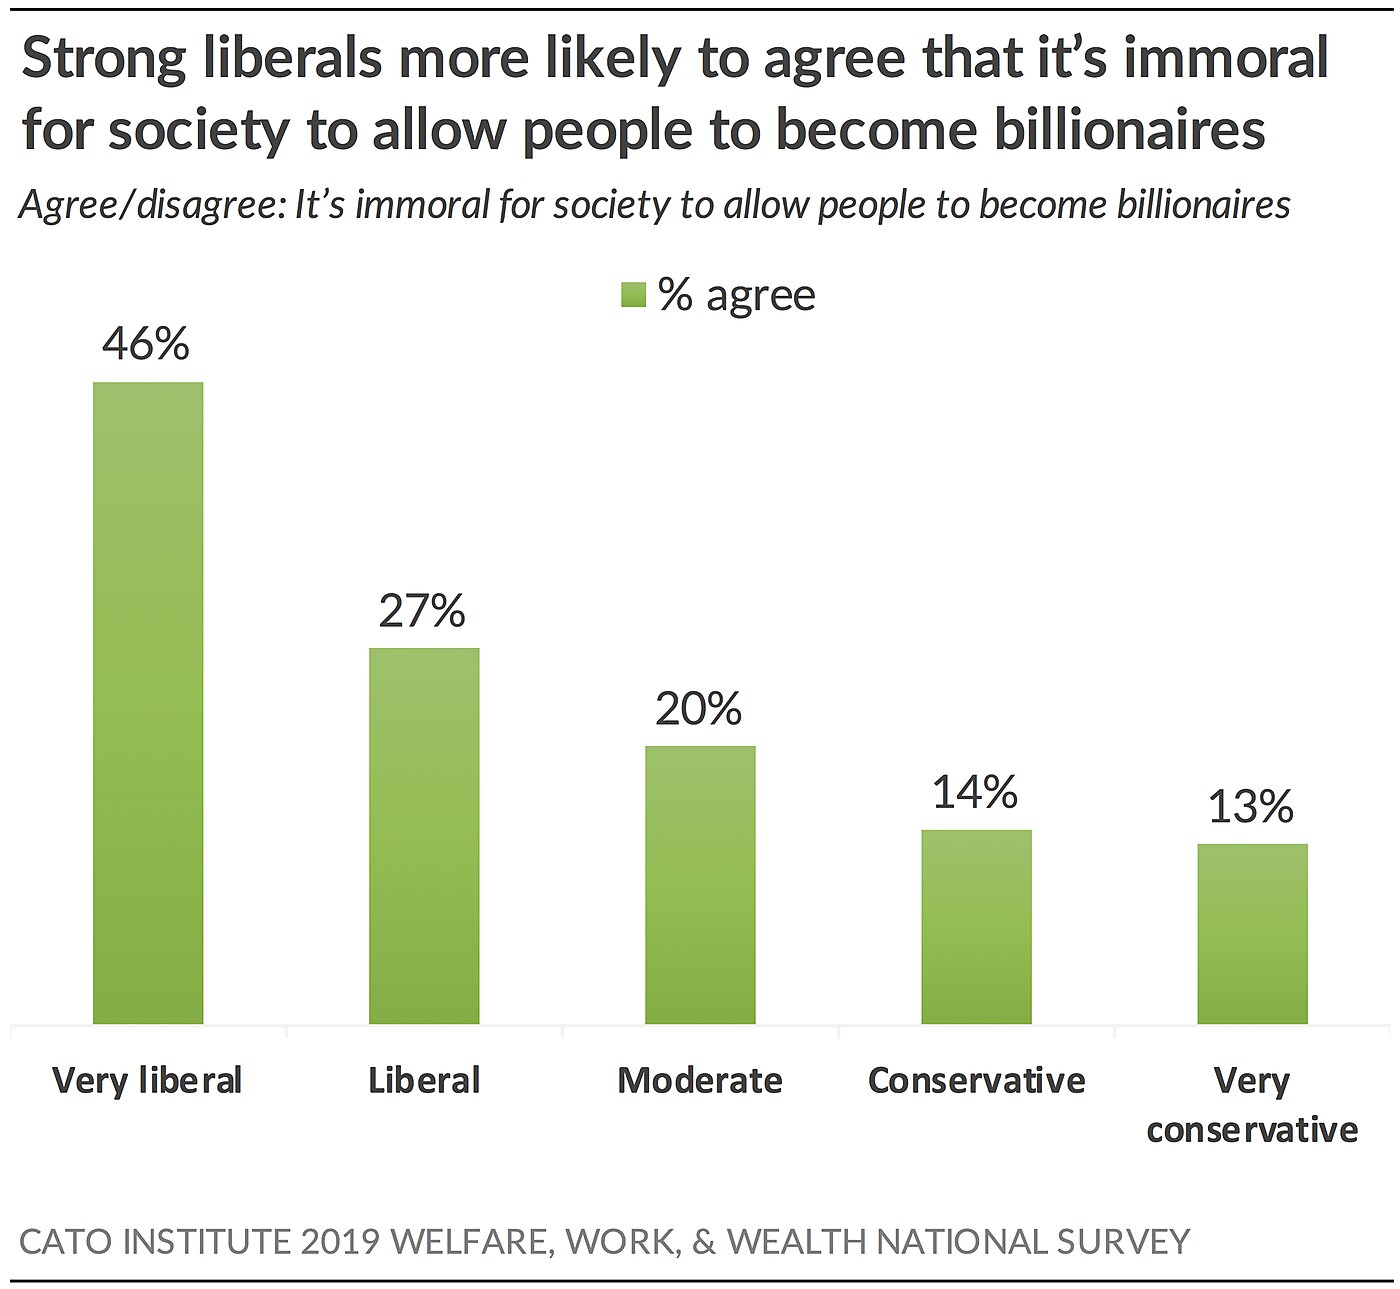 Strong liberals likely to agree immoral to allow people to become billionaires